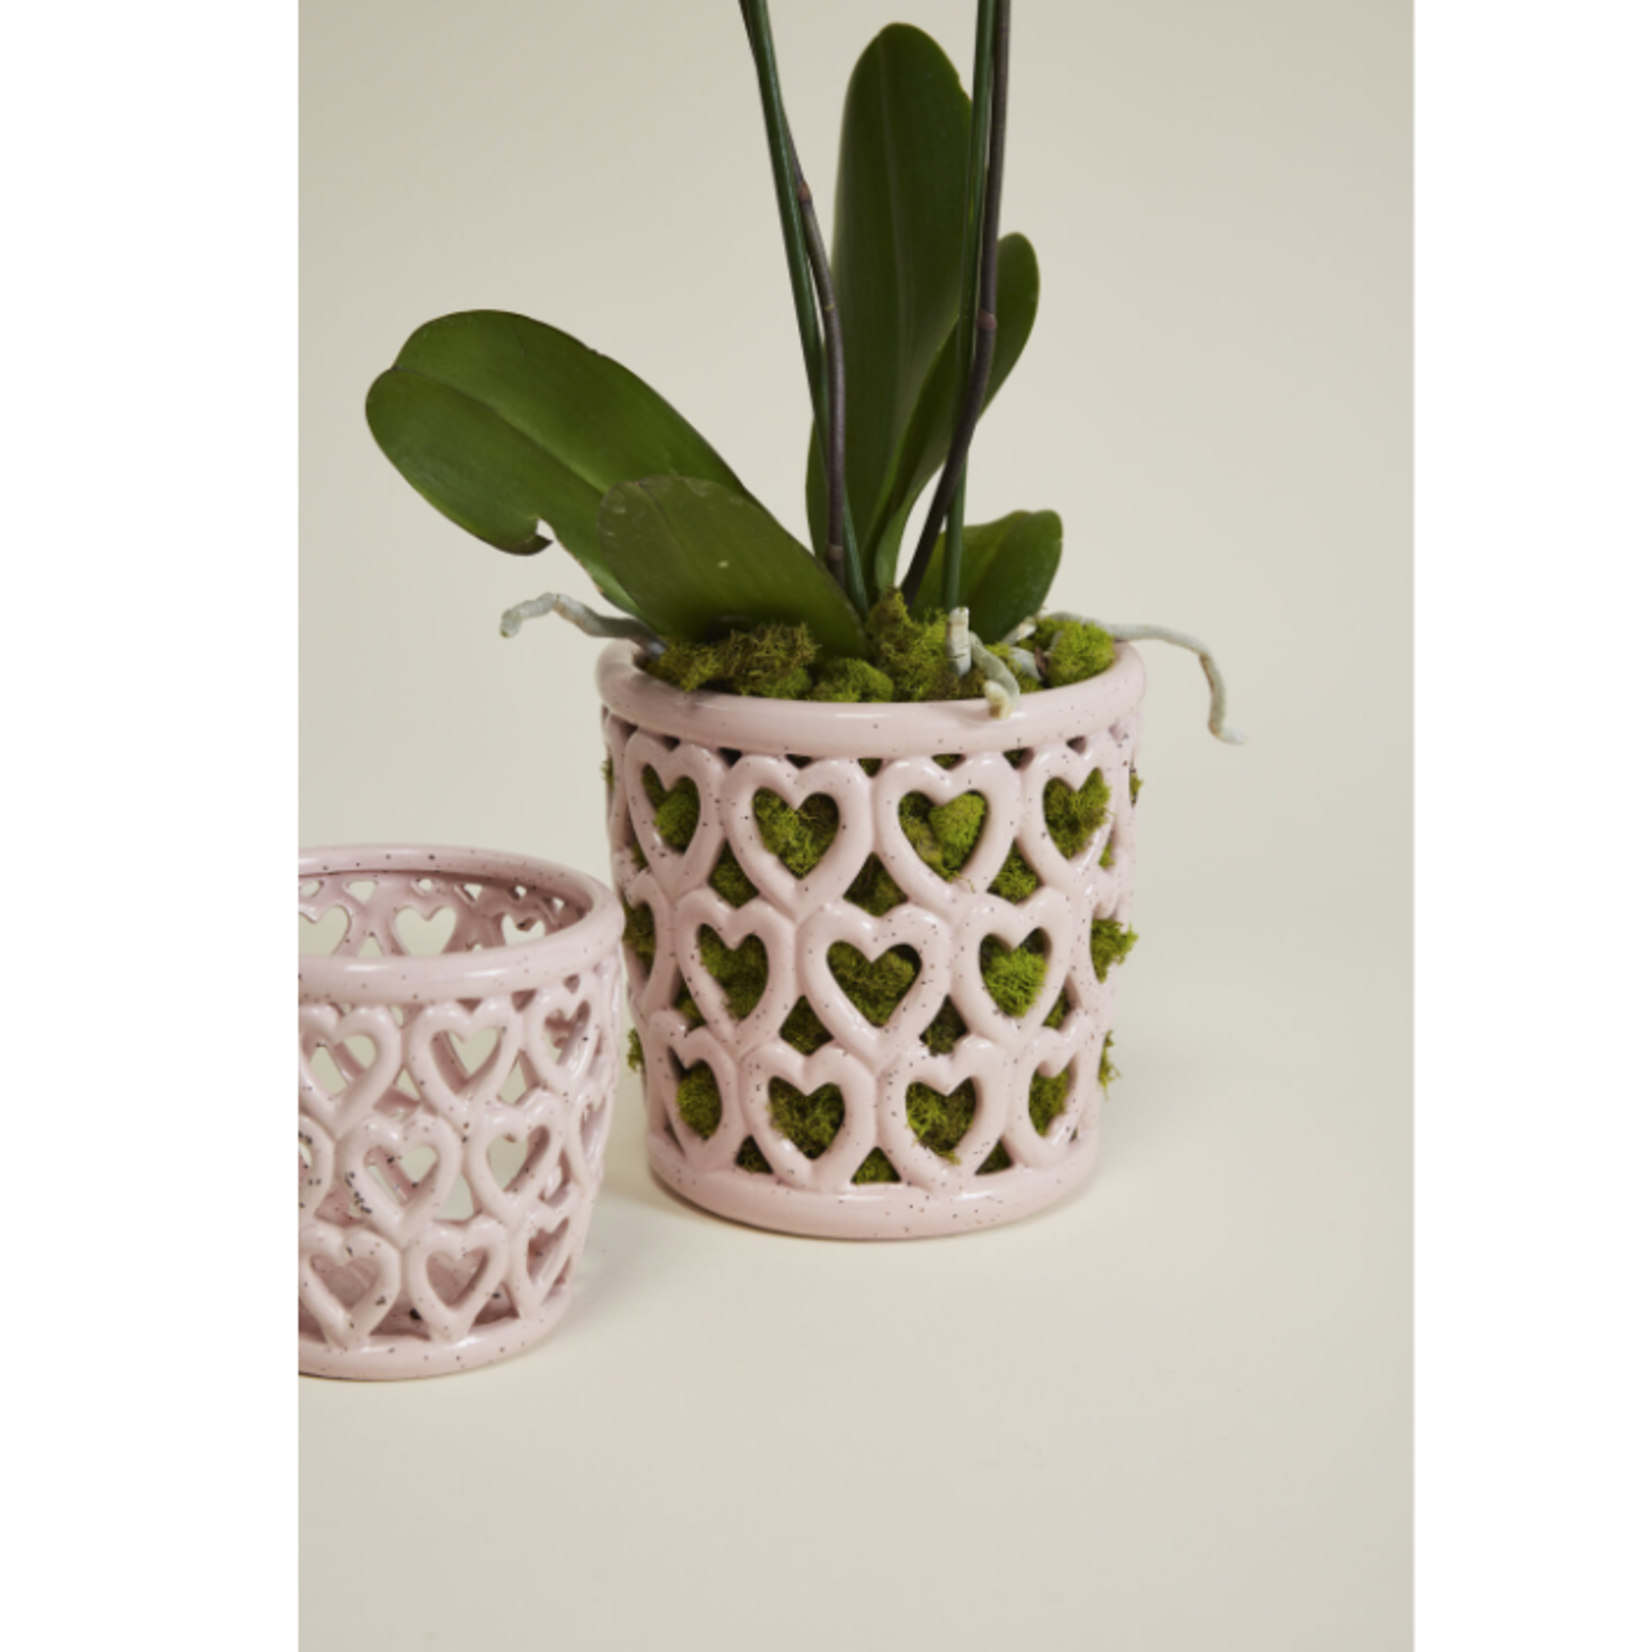 40$ off was $13 now $7.79, 5.25” X 5.25” PINK CERAMIC CHERISHED HEARTS ORCHID POT